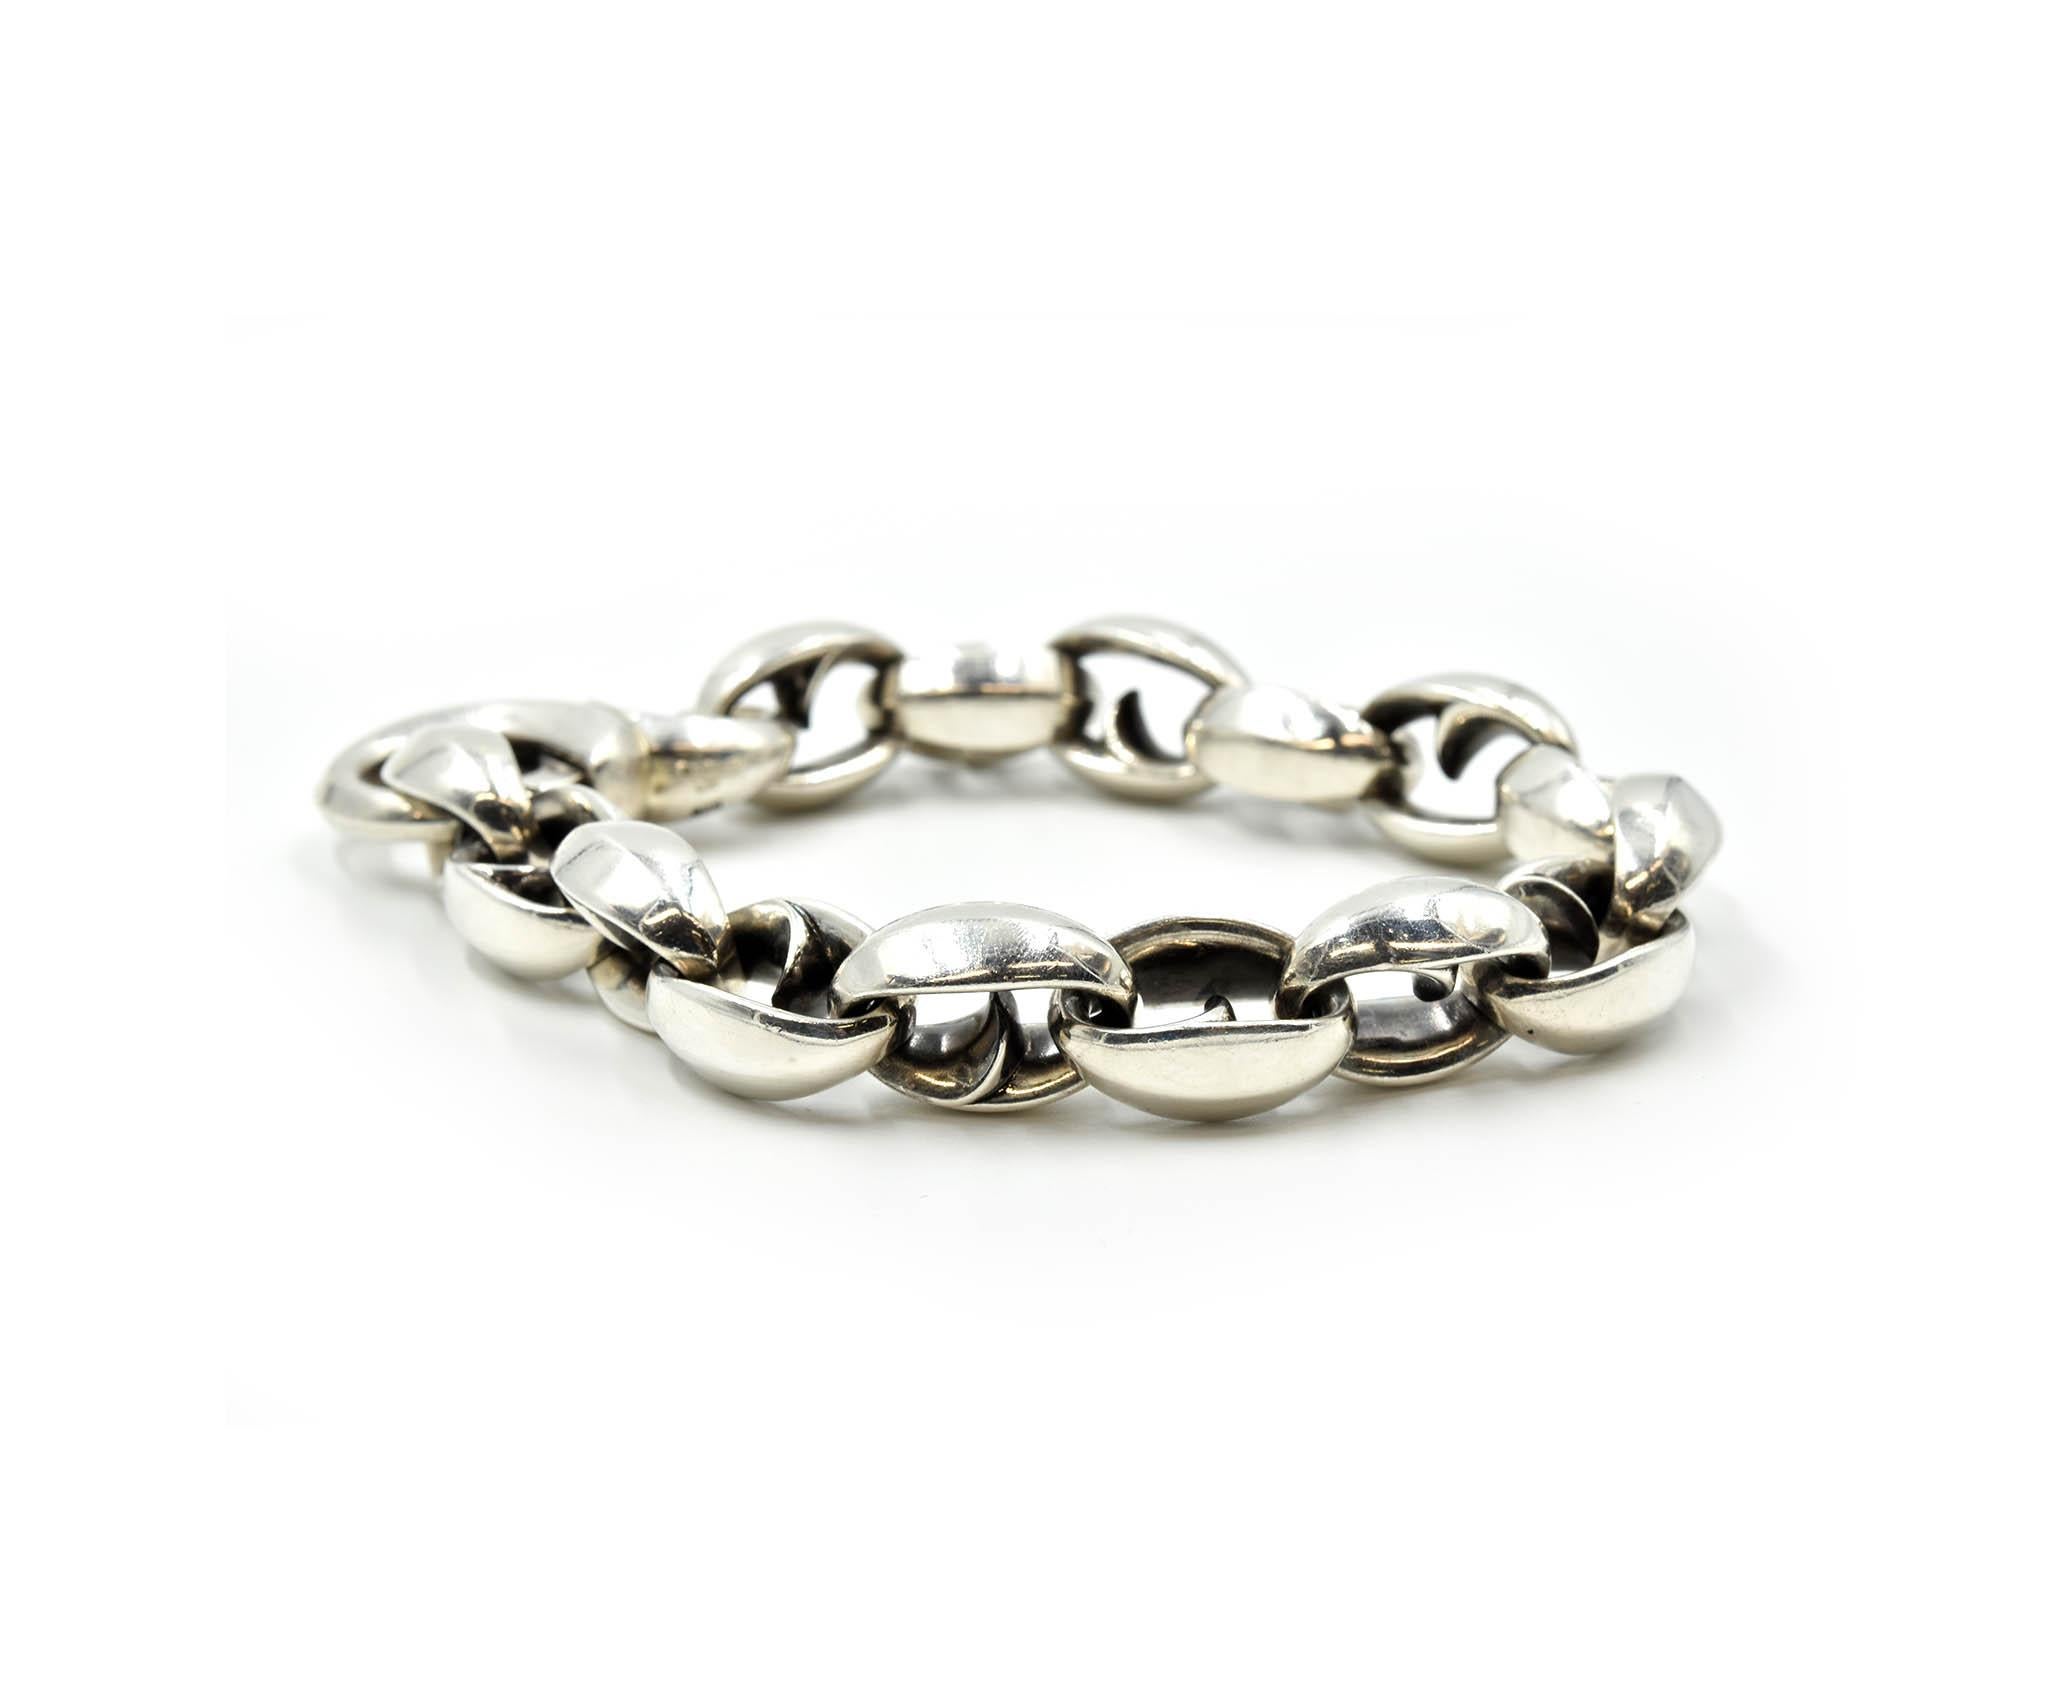 Designer: Stephen Webster
Material: sterling silver
Dimensions: bracelet measures 8 3/4-inches long and 1-inches wide
Weight: 99.30 grams
Retail: $695
